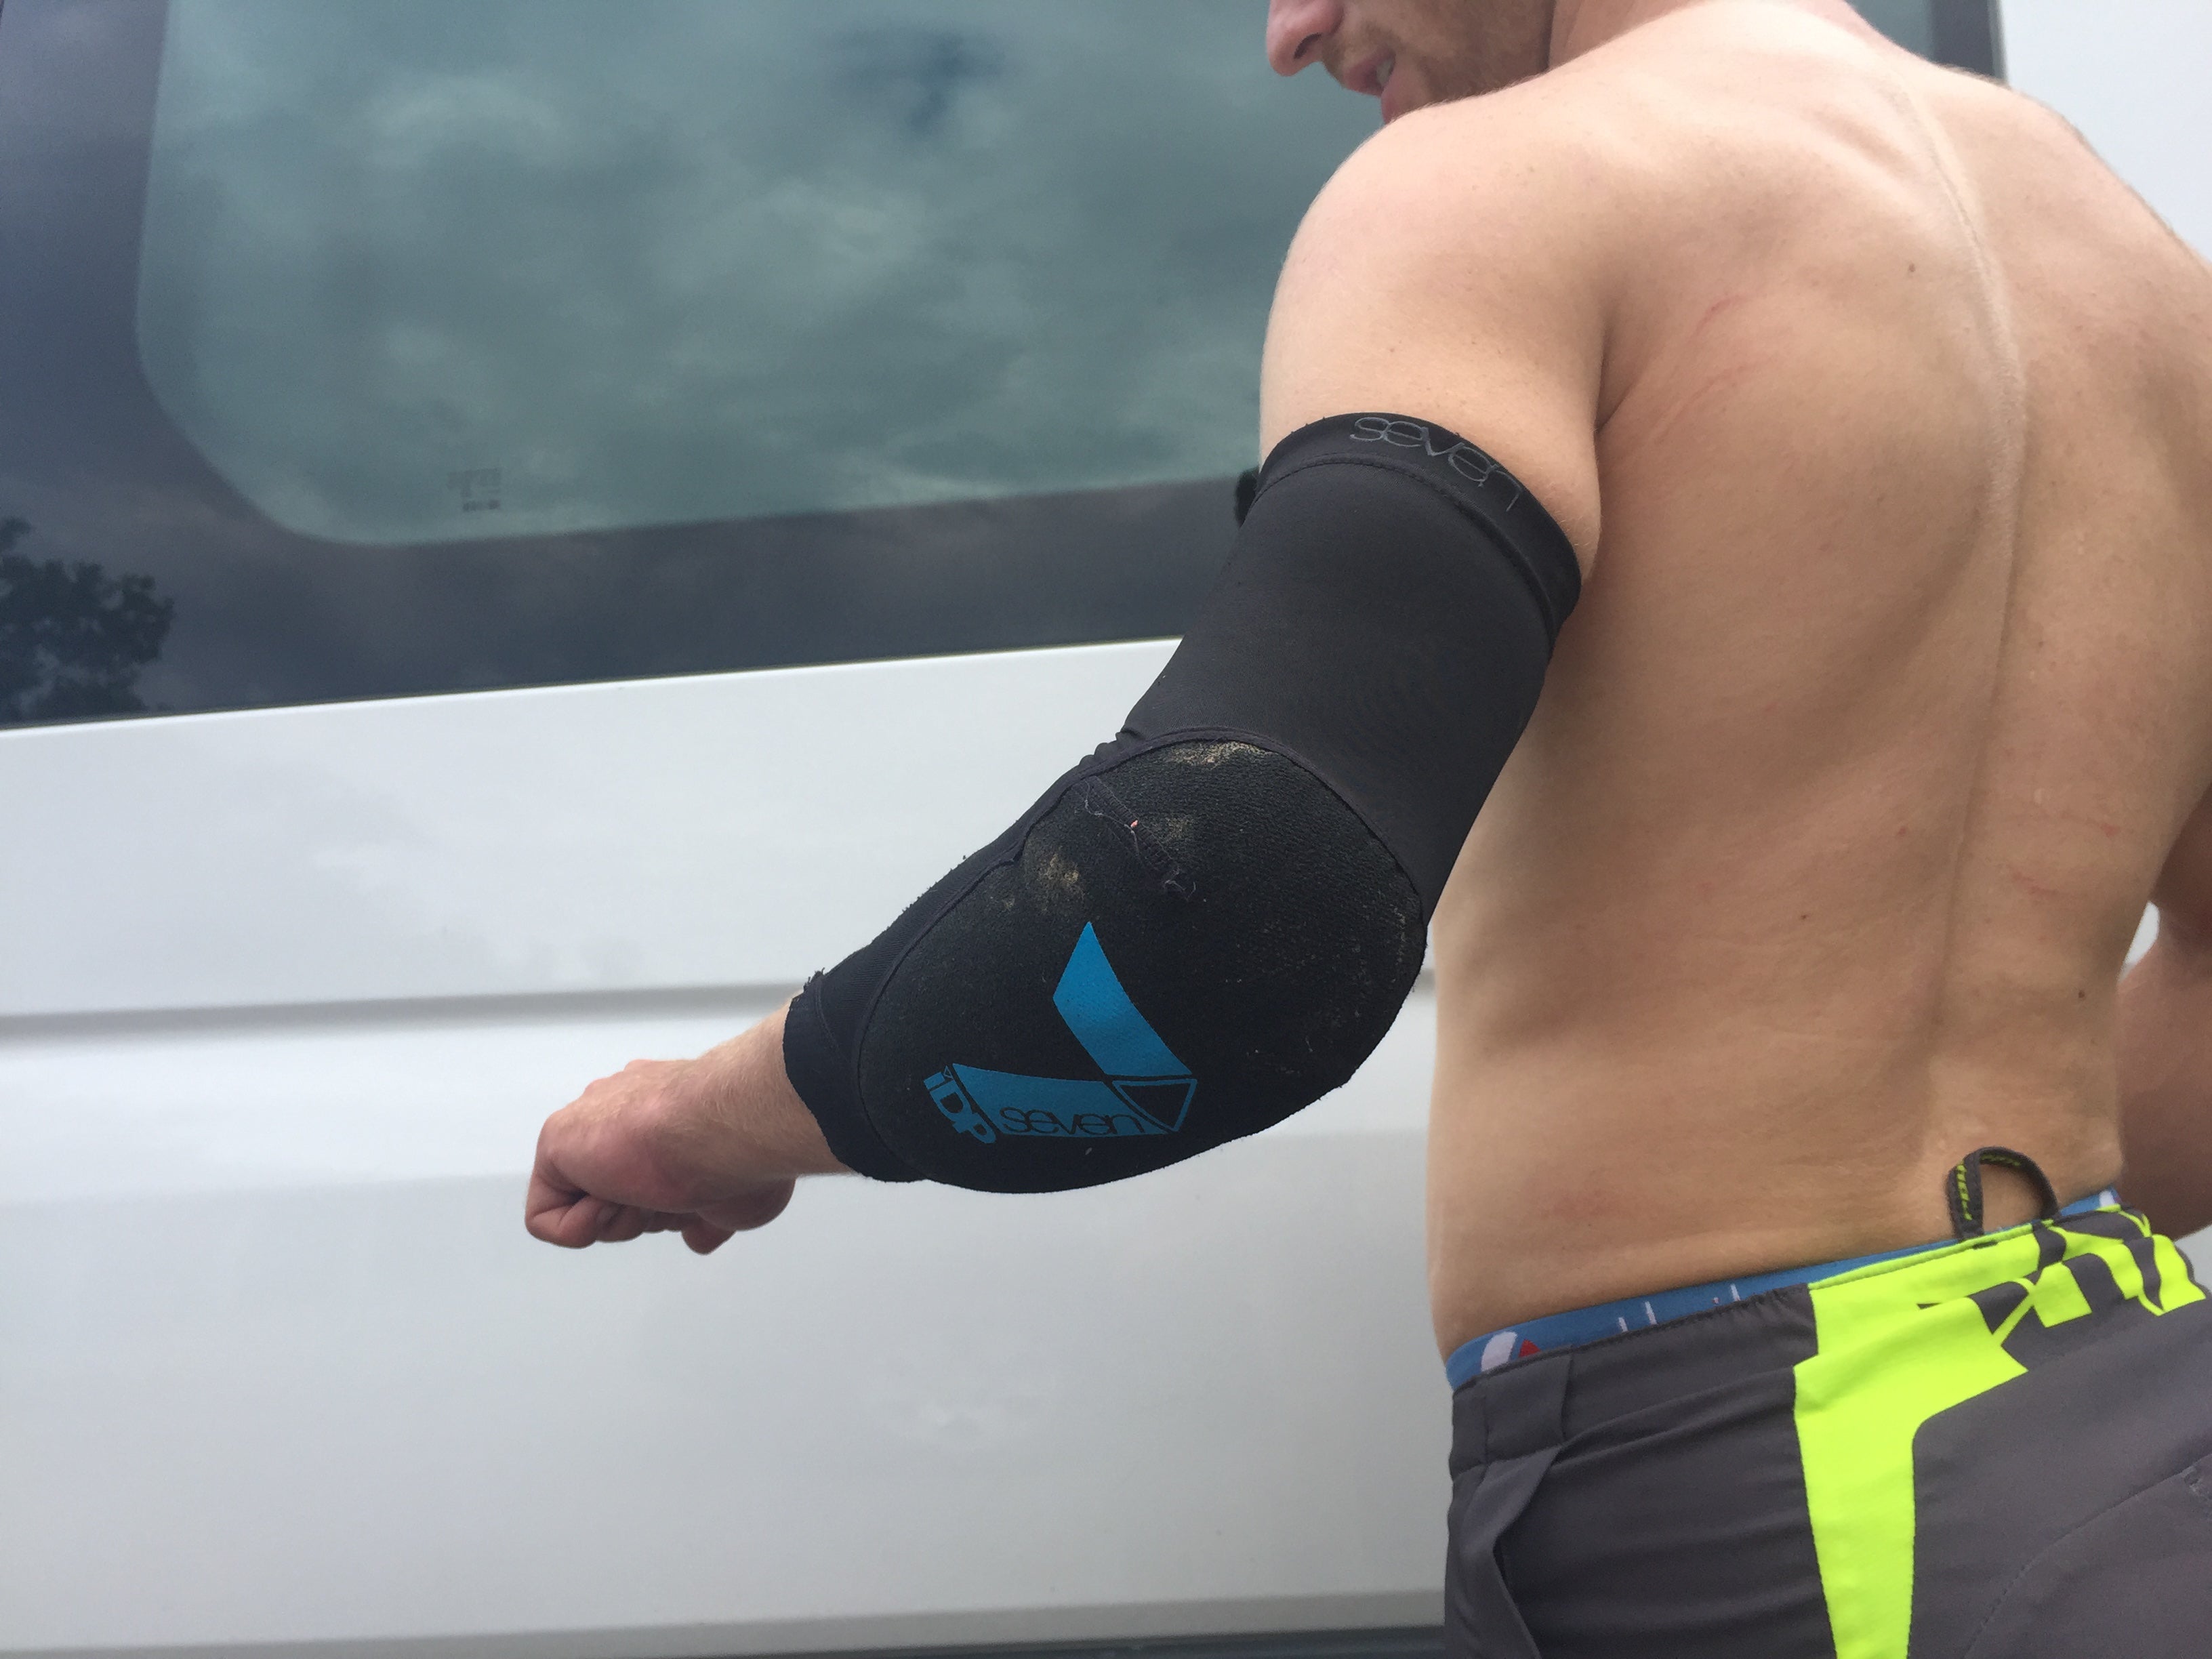 7iDP Transition Elbow Pads Review - Worldwide Cyclery